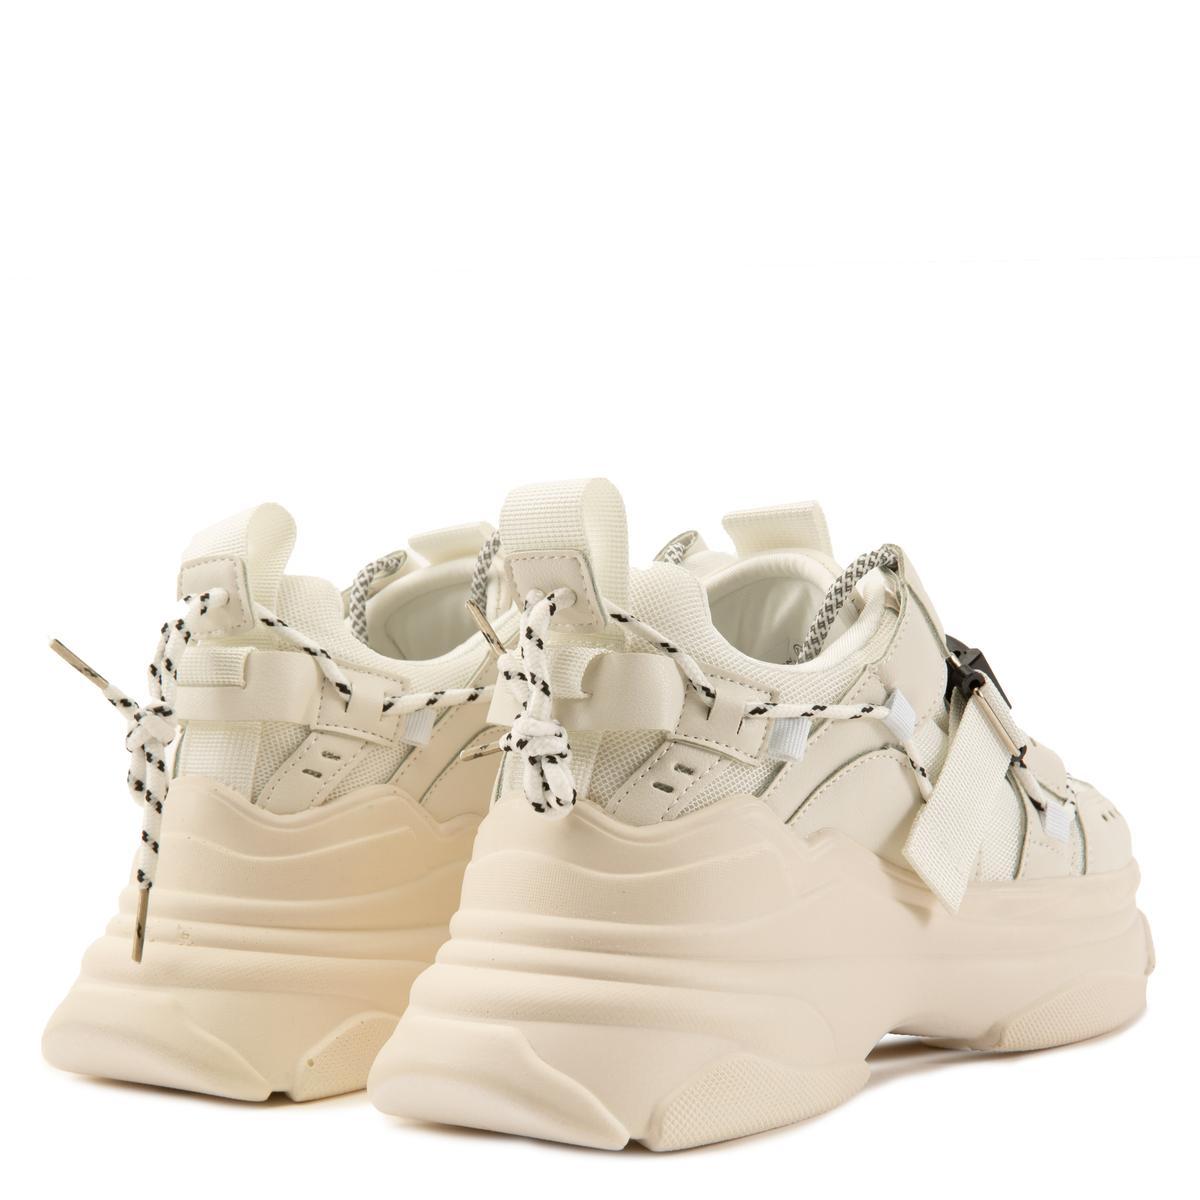 Packo-1 Lace-Up Sneakers